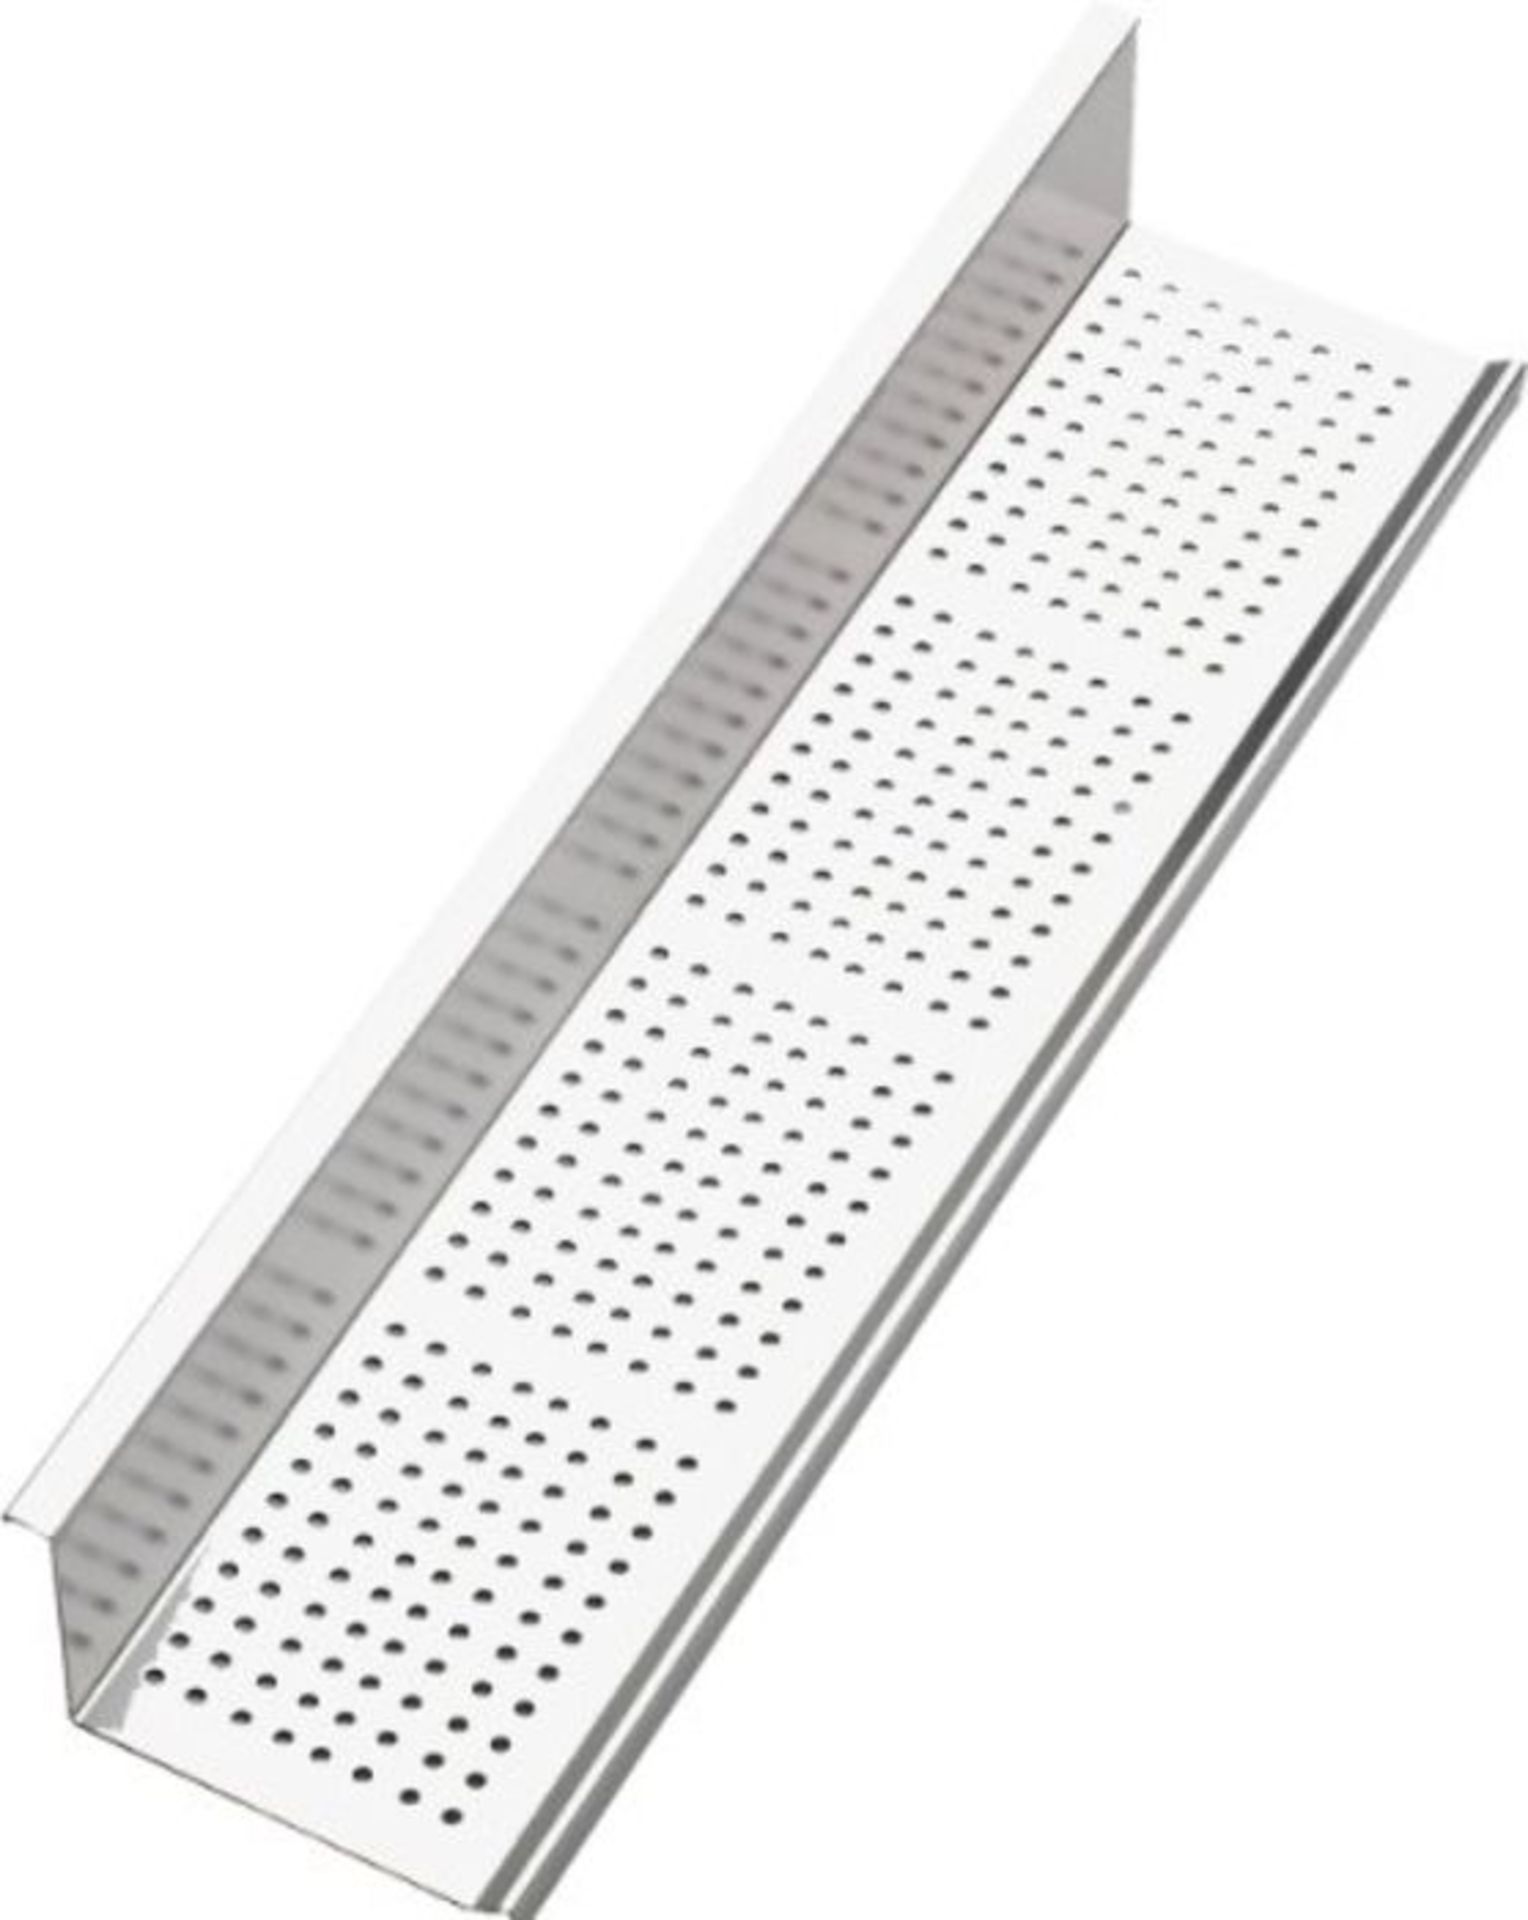 Dancook Universal shelf for 50cm and 62cm wide box Barbecues - (product no. 130 120).